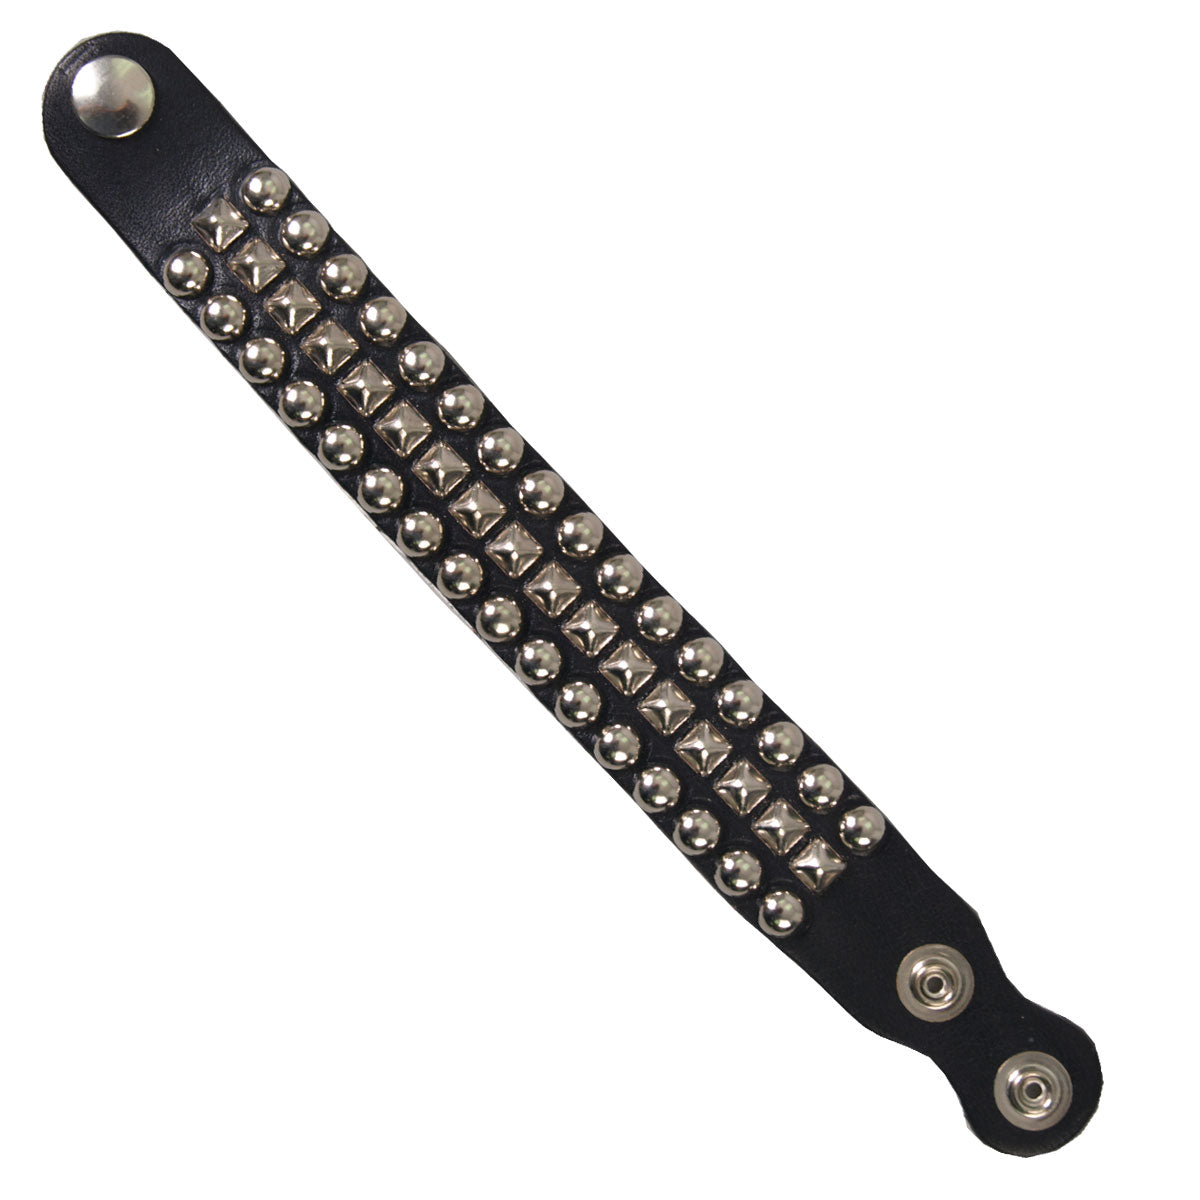 Hot Leathers Leather Wrist Band with Studs